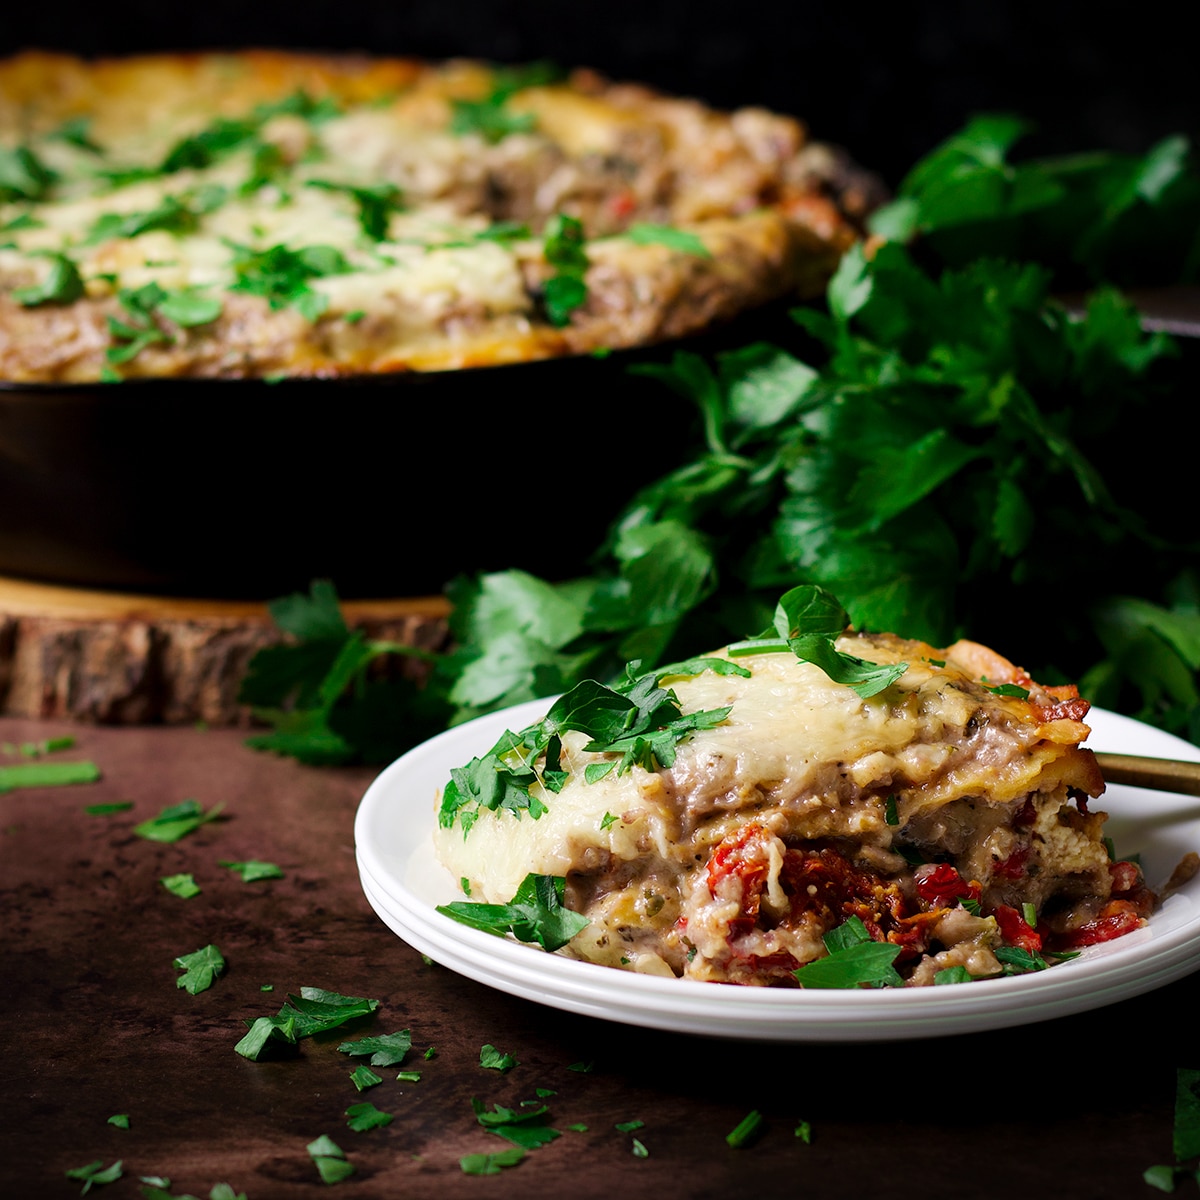 A plate of vegetarian lasagna resting on a table next to skillet baked vegetable lasagna.